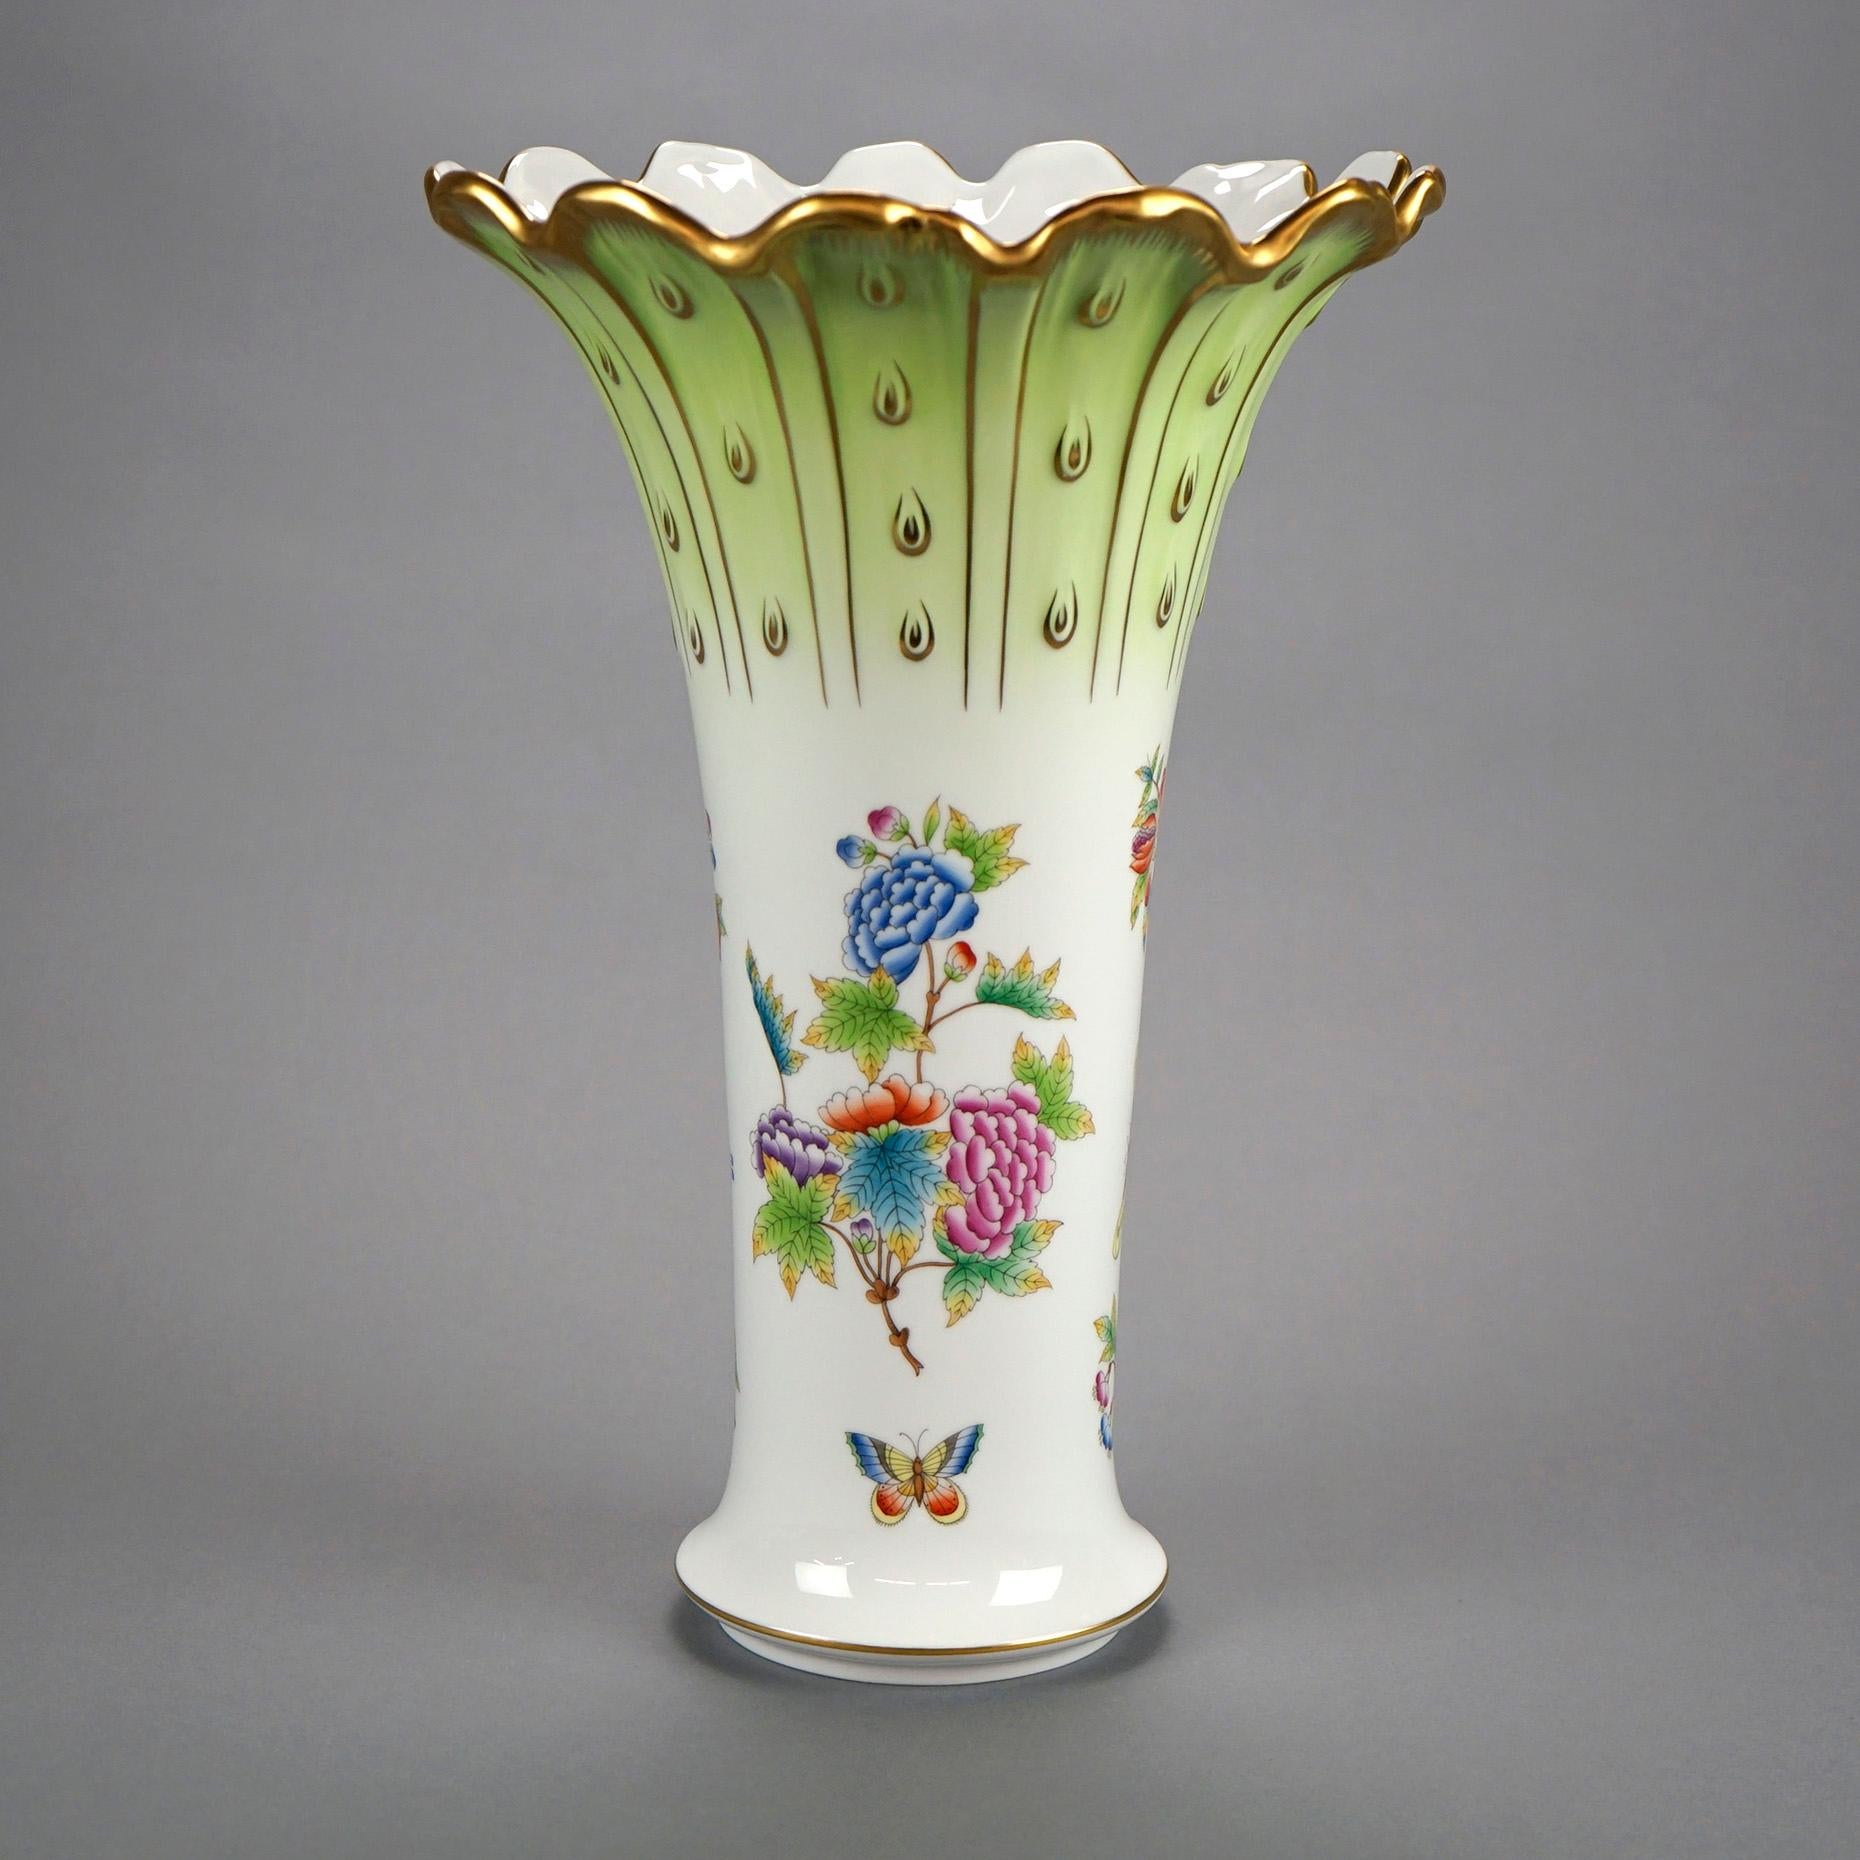 Painted Large Herend Porcelain Decorated Vase, Flower Garden with Butterflies, 20th C